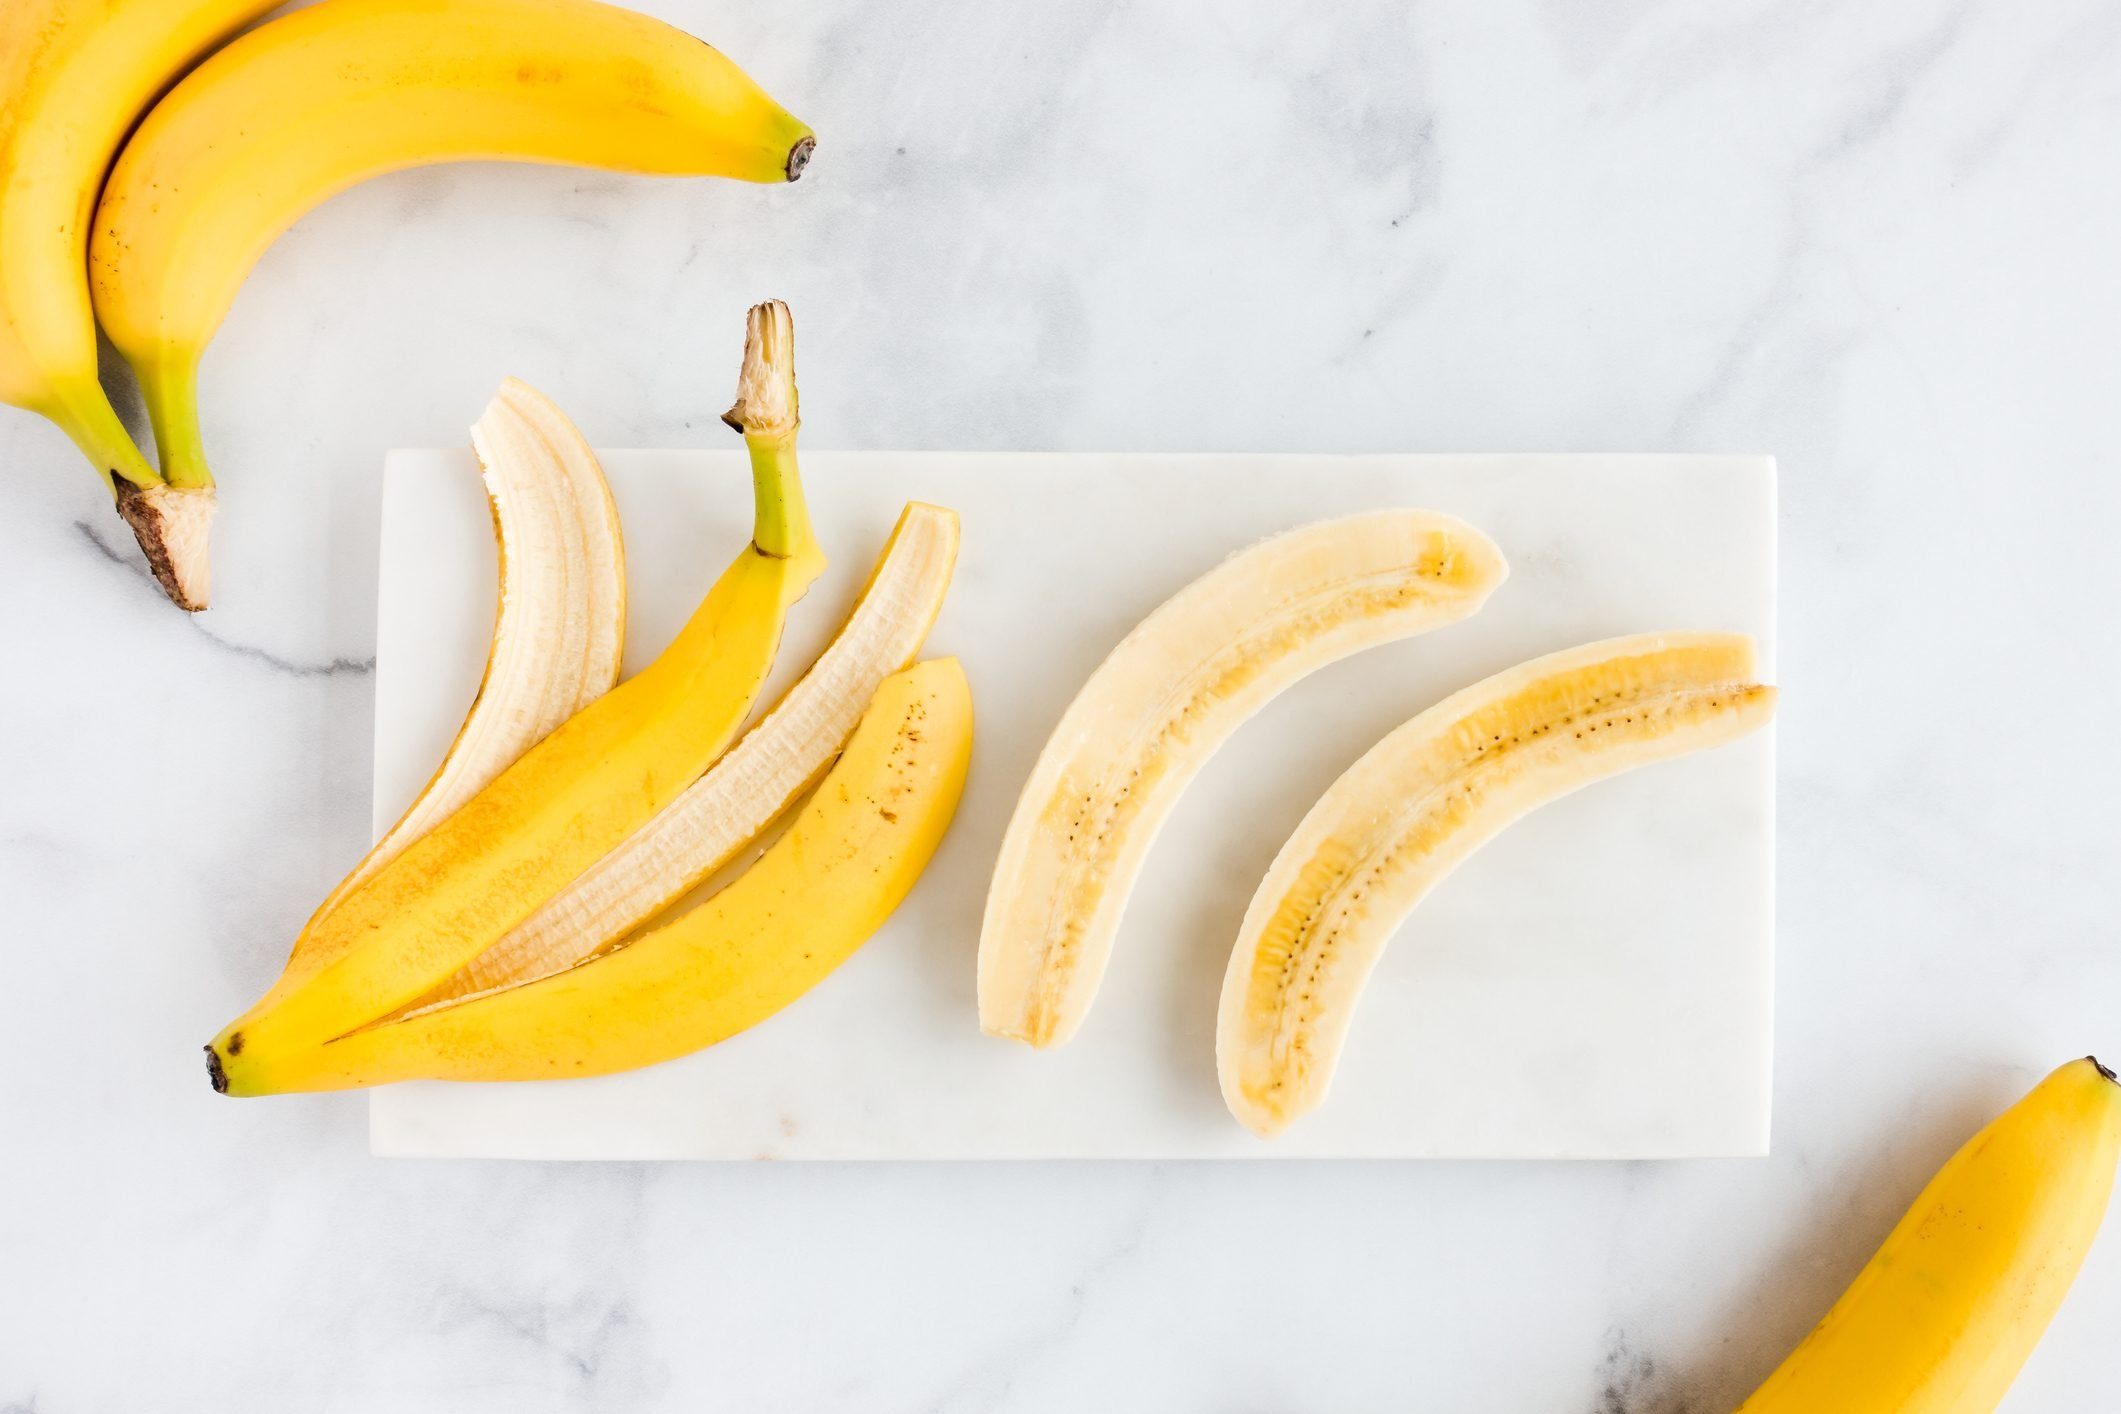 Banana Peel And Bananas On White Marble Board|tray with breakfast foods, including bananas, french toast, and coffee, on a bed with white sheets; a dog sits next to the tray